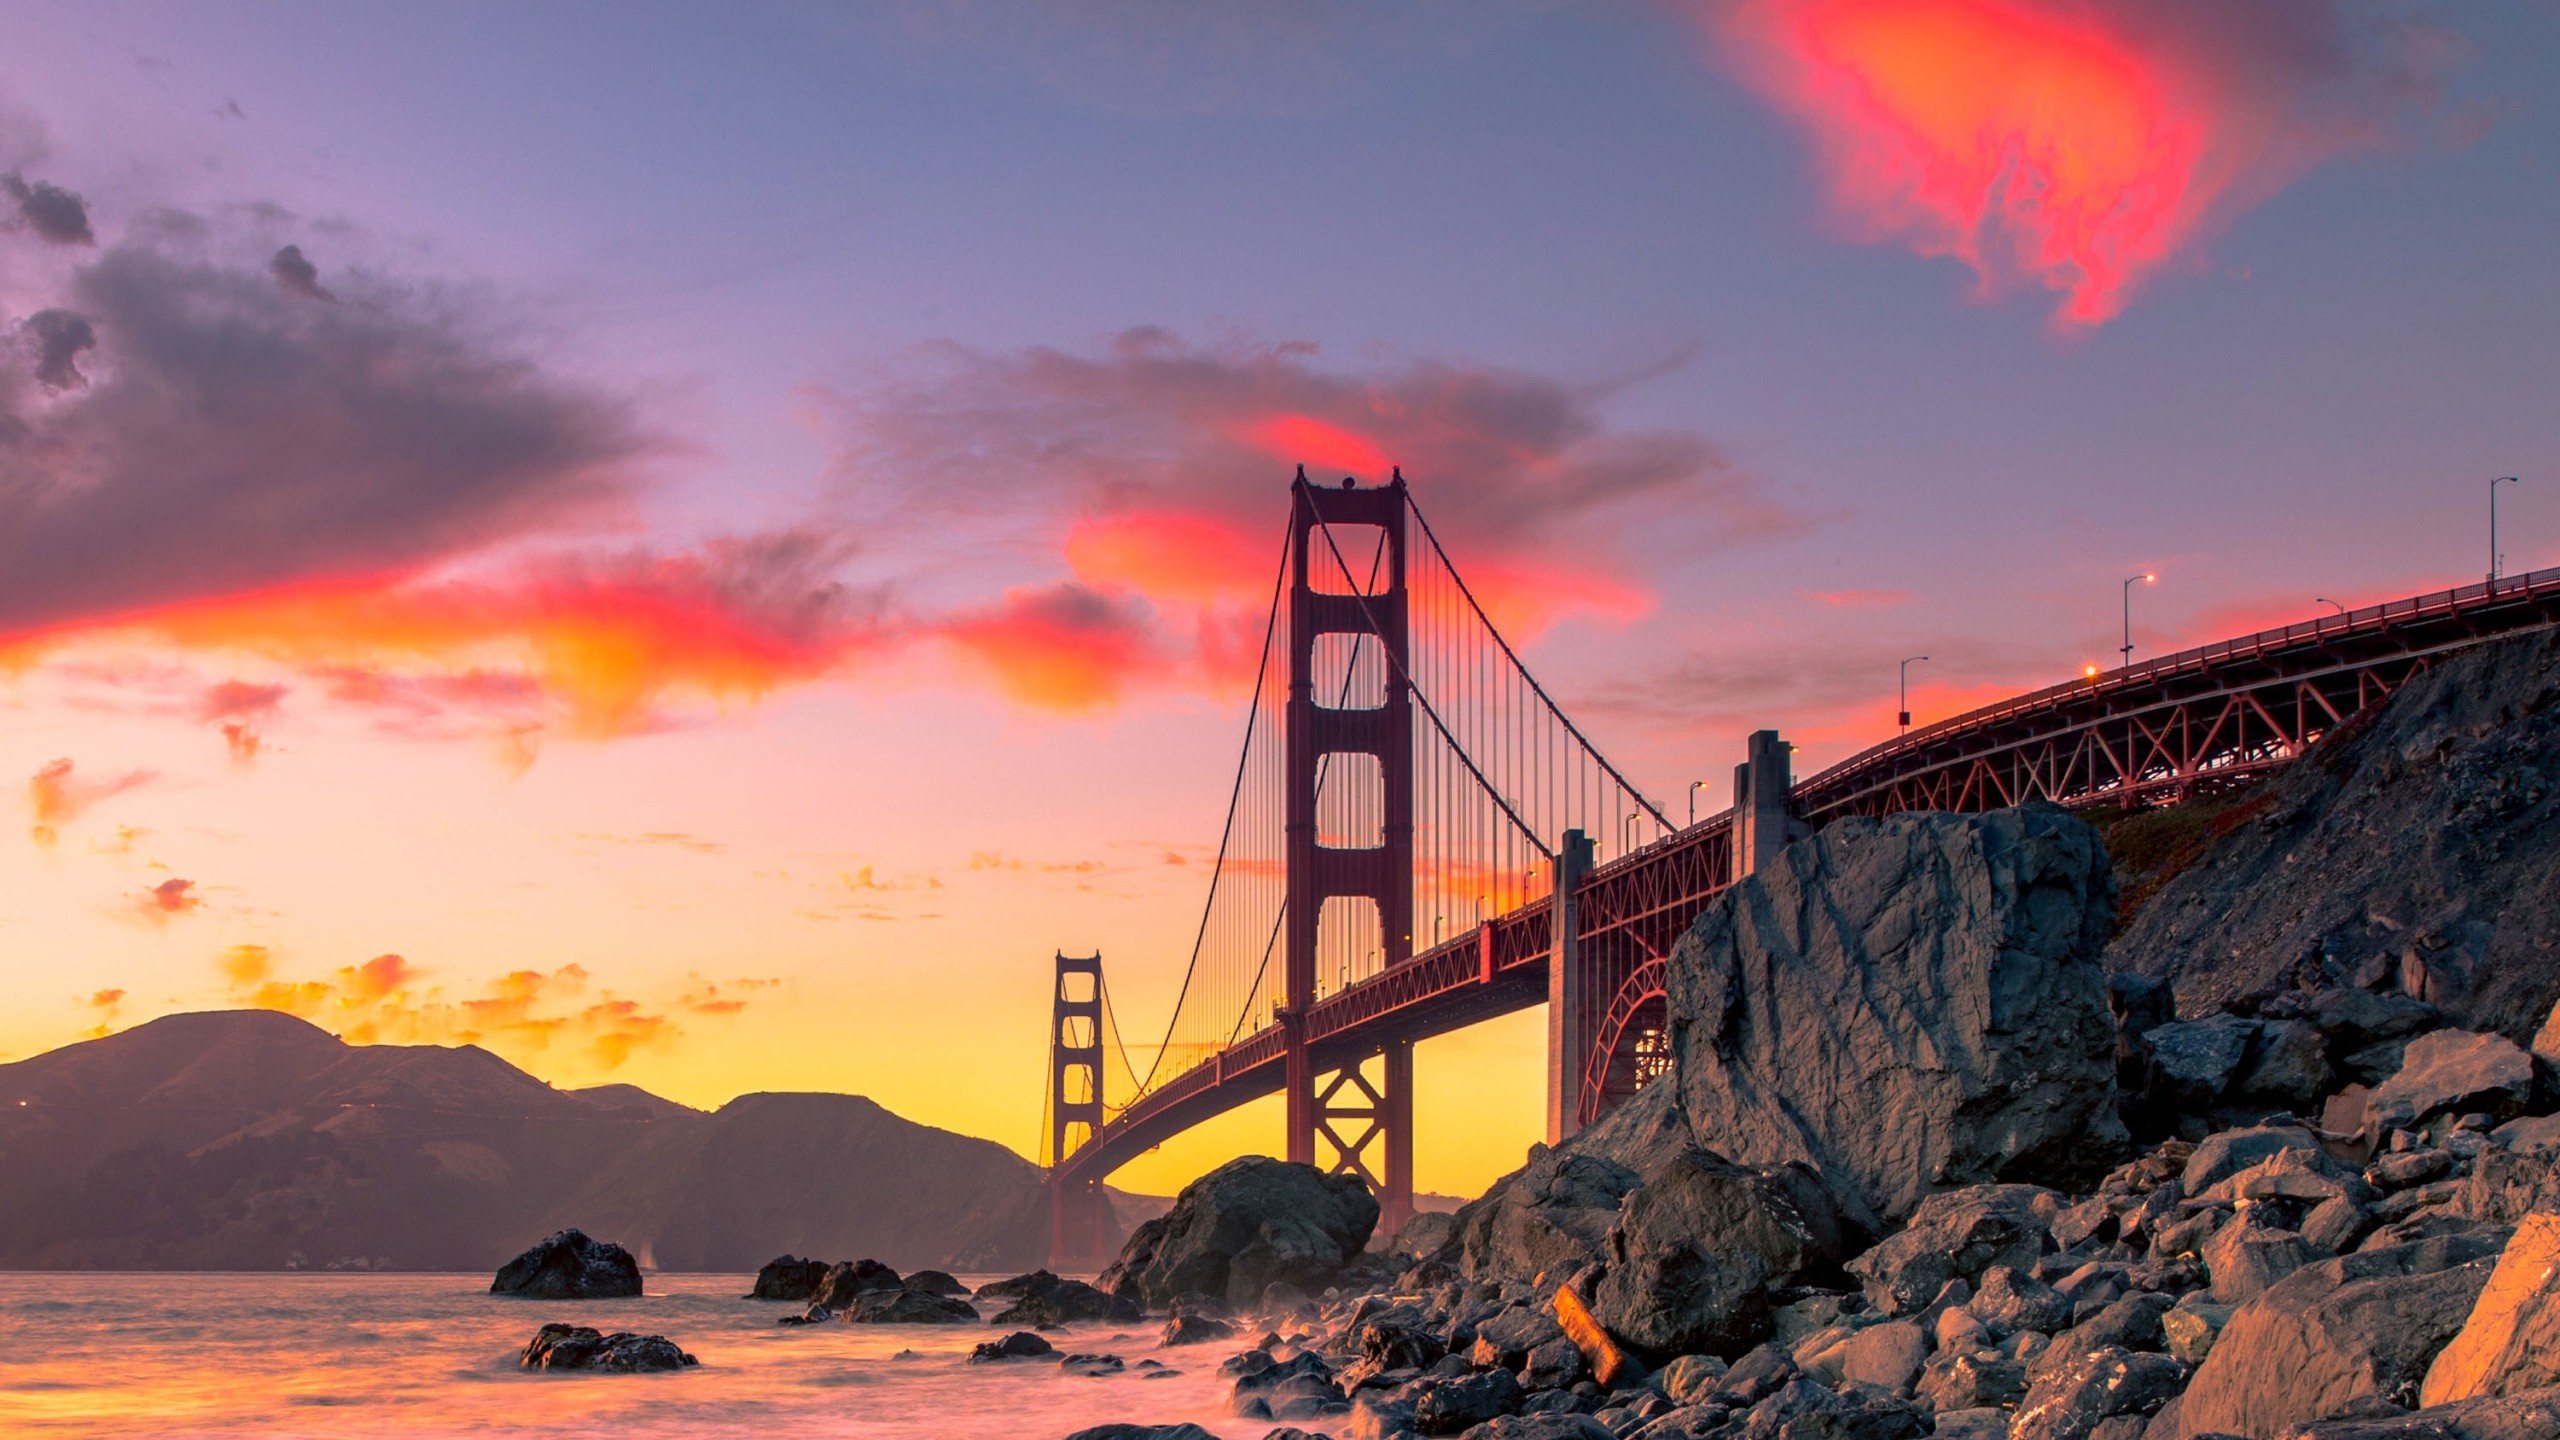 San Francisco: Breathtaking views of one of the world’s greatest bays, SF. 2560x1440 HD Wallpaper.